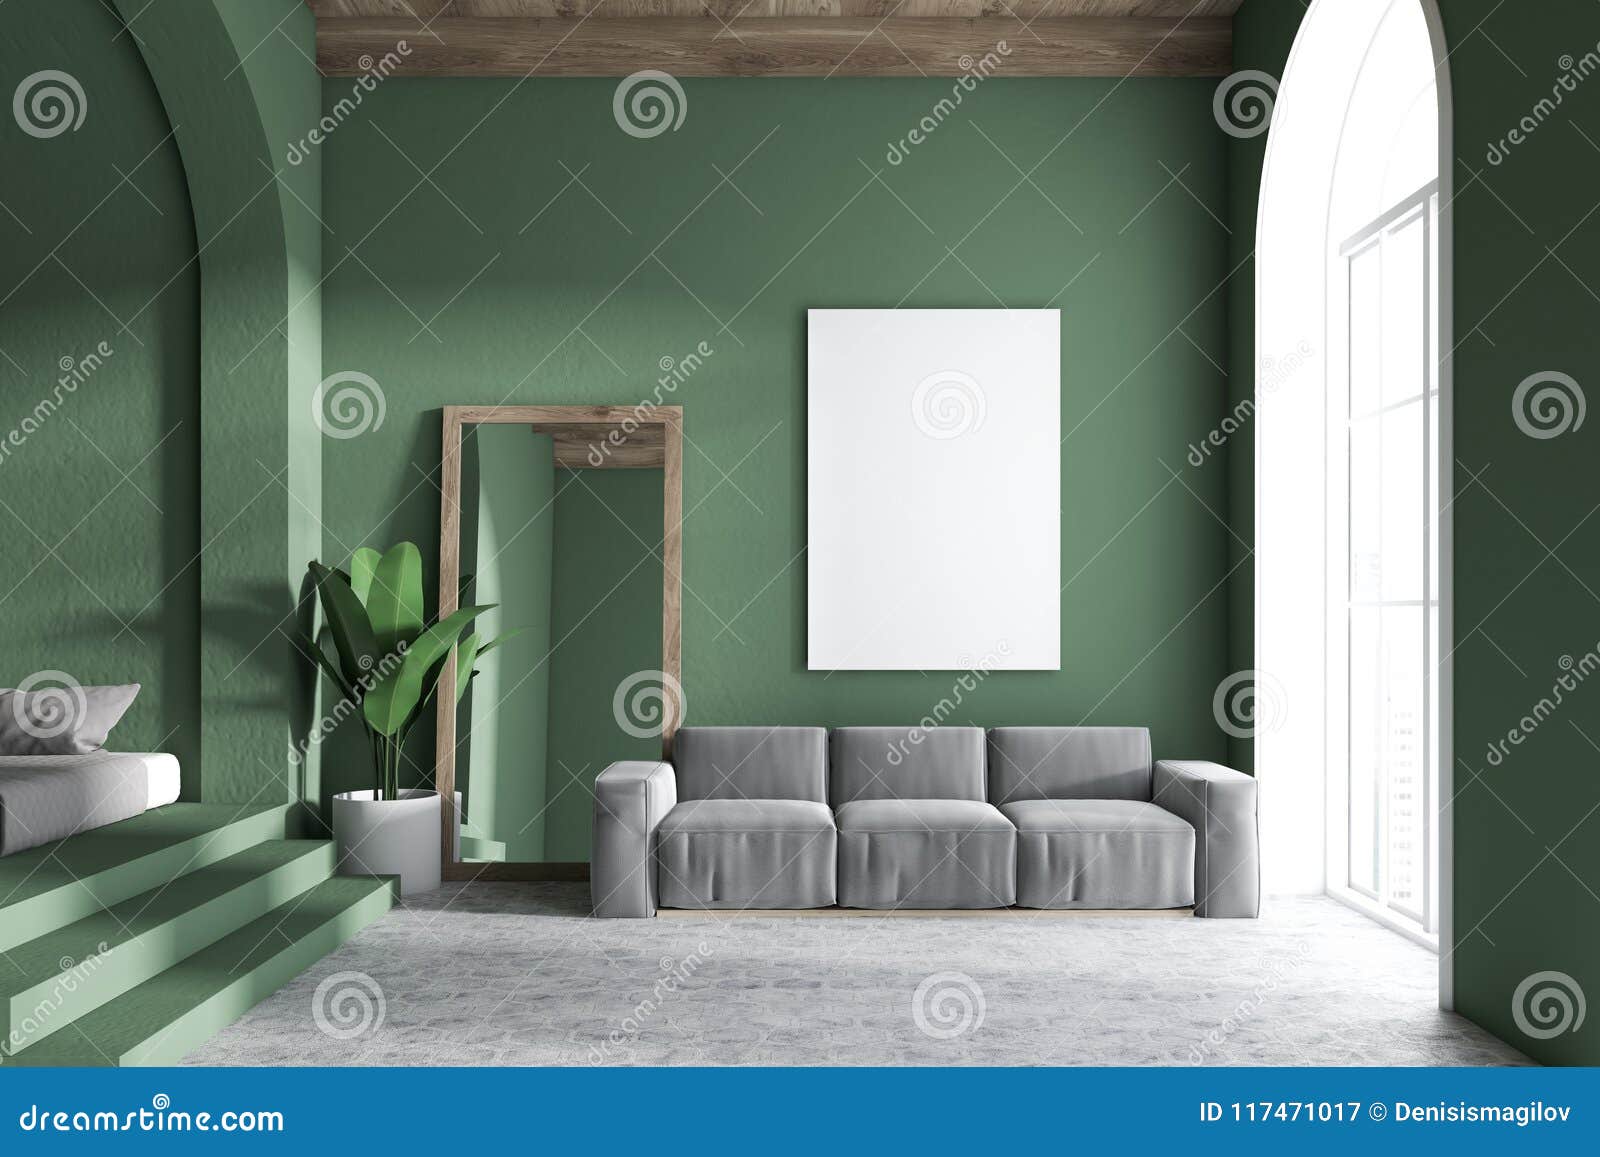 Green Living Room Interior Mirror And Poster Stock